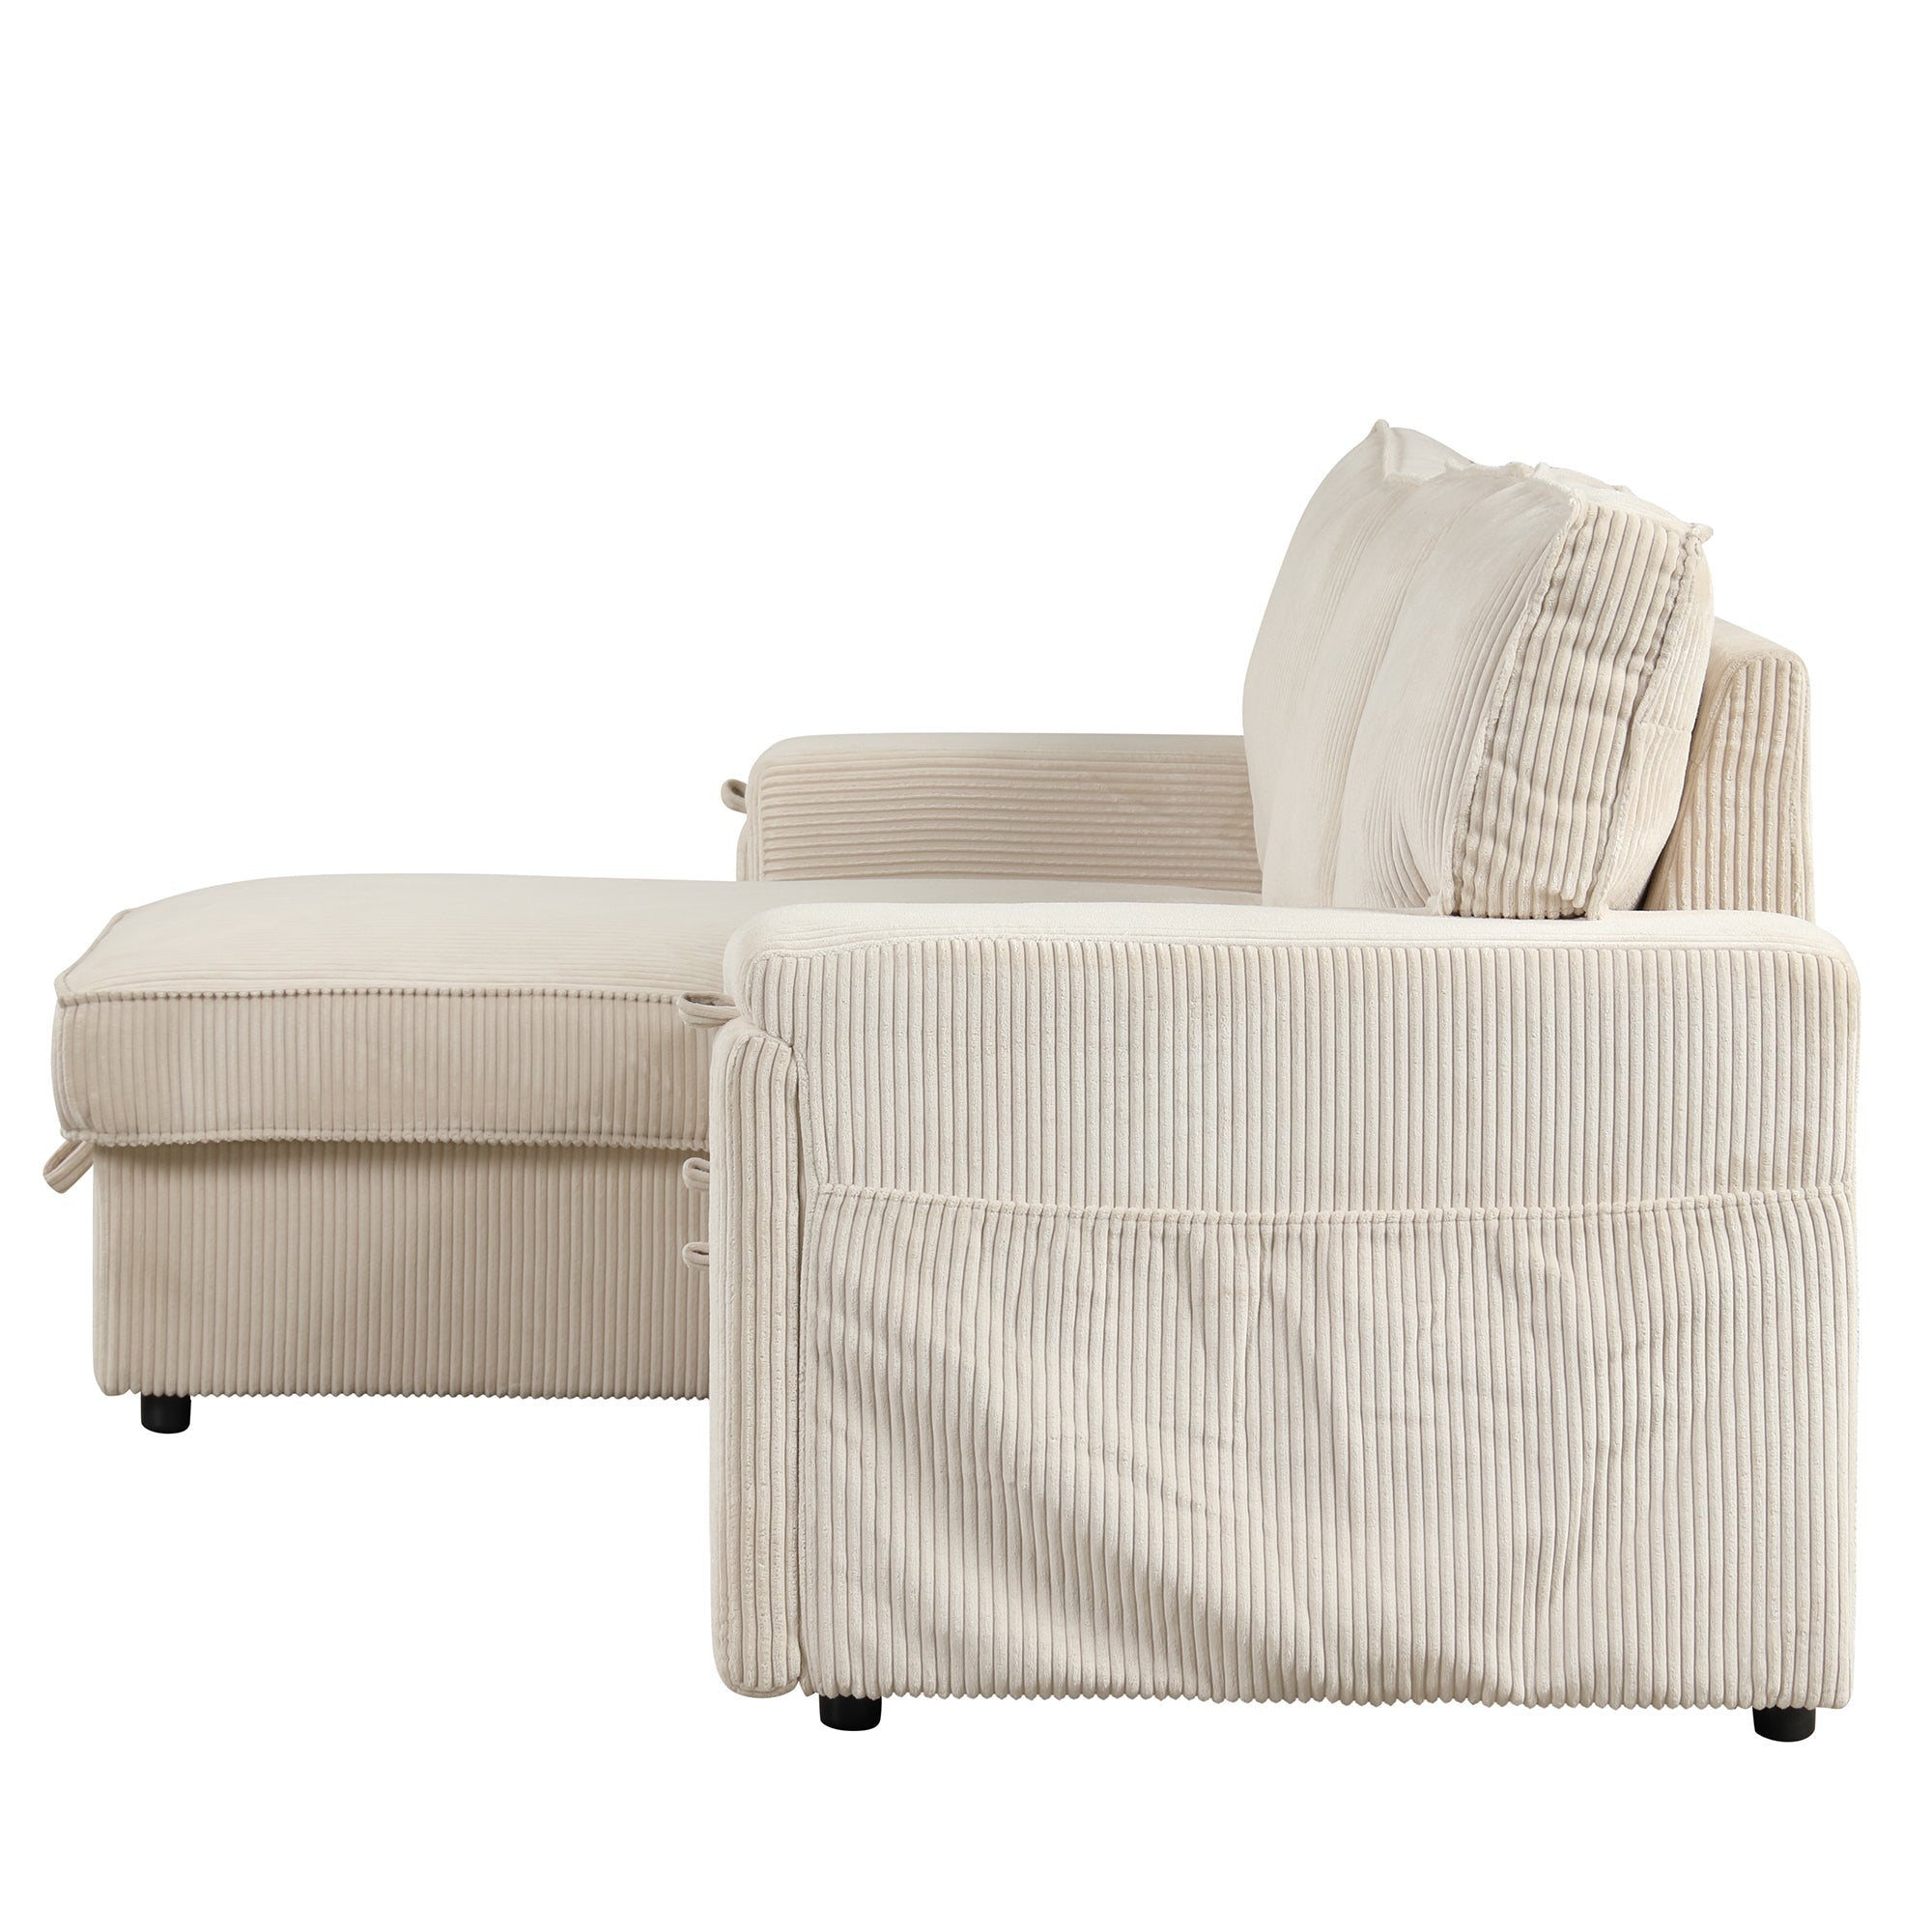 Upholstery Sleeper Sectional Sofa: Storage Bags, 2 Cup Holders on Arms Beige-Sleeper Sectionals-American Furniture Outlet